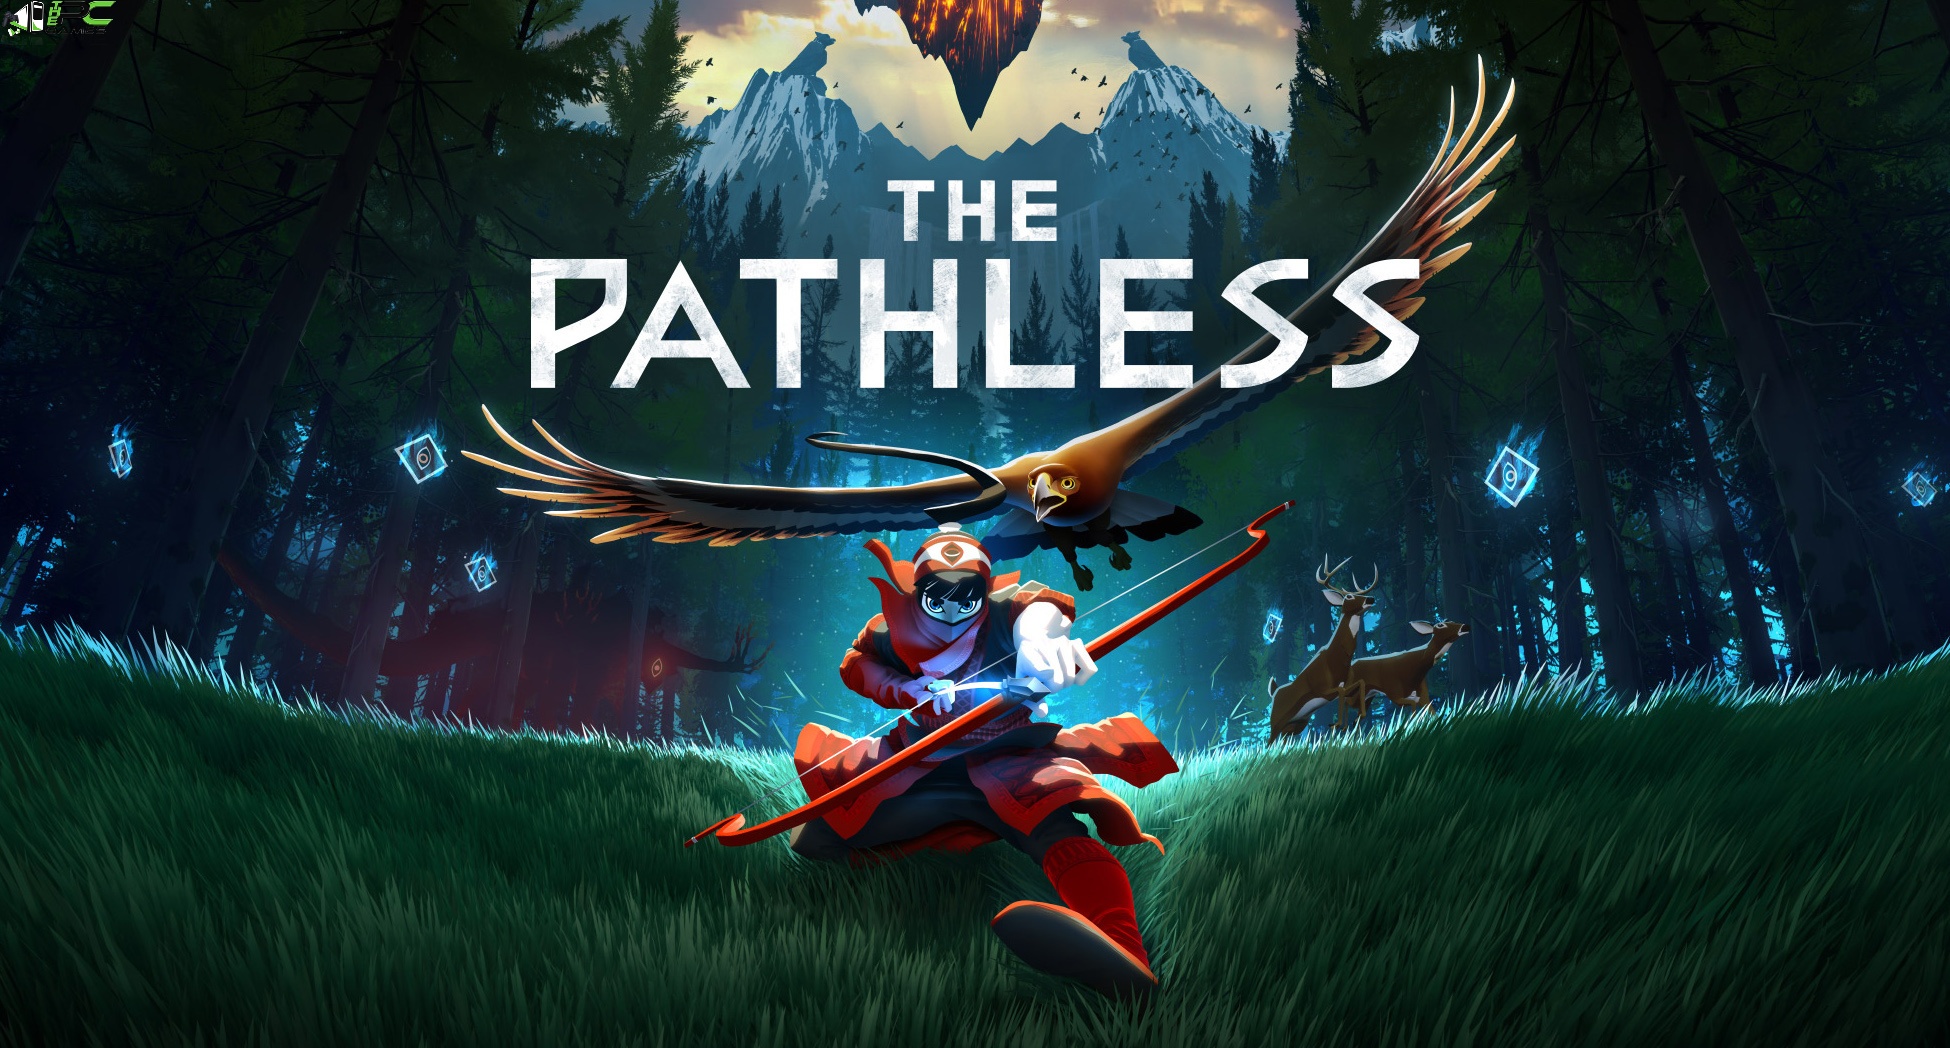 THE PATHLESS CRACK PC GAME + FREE DOWNLOAD